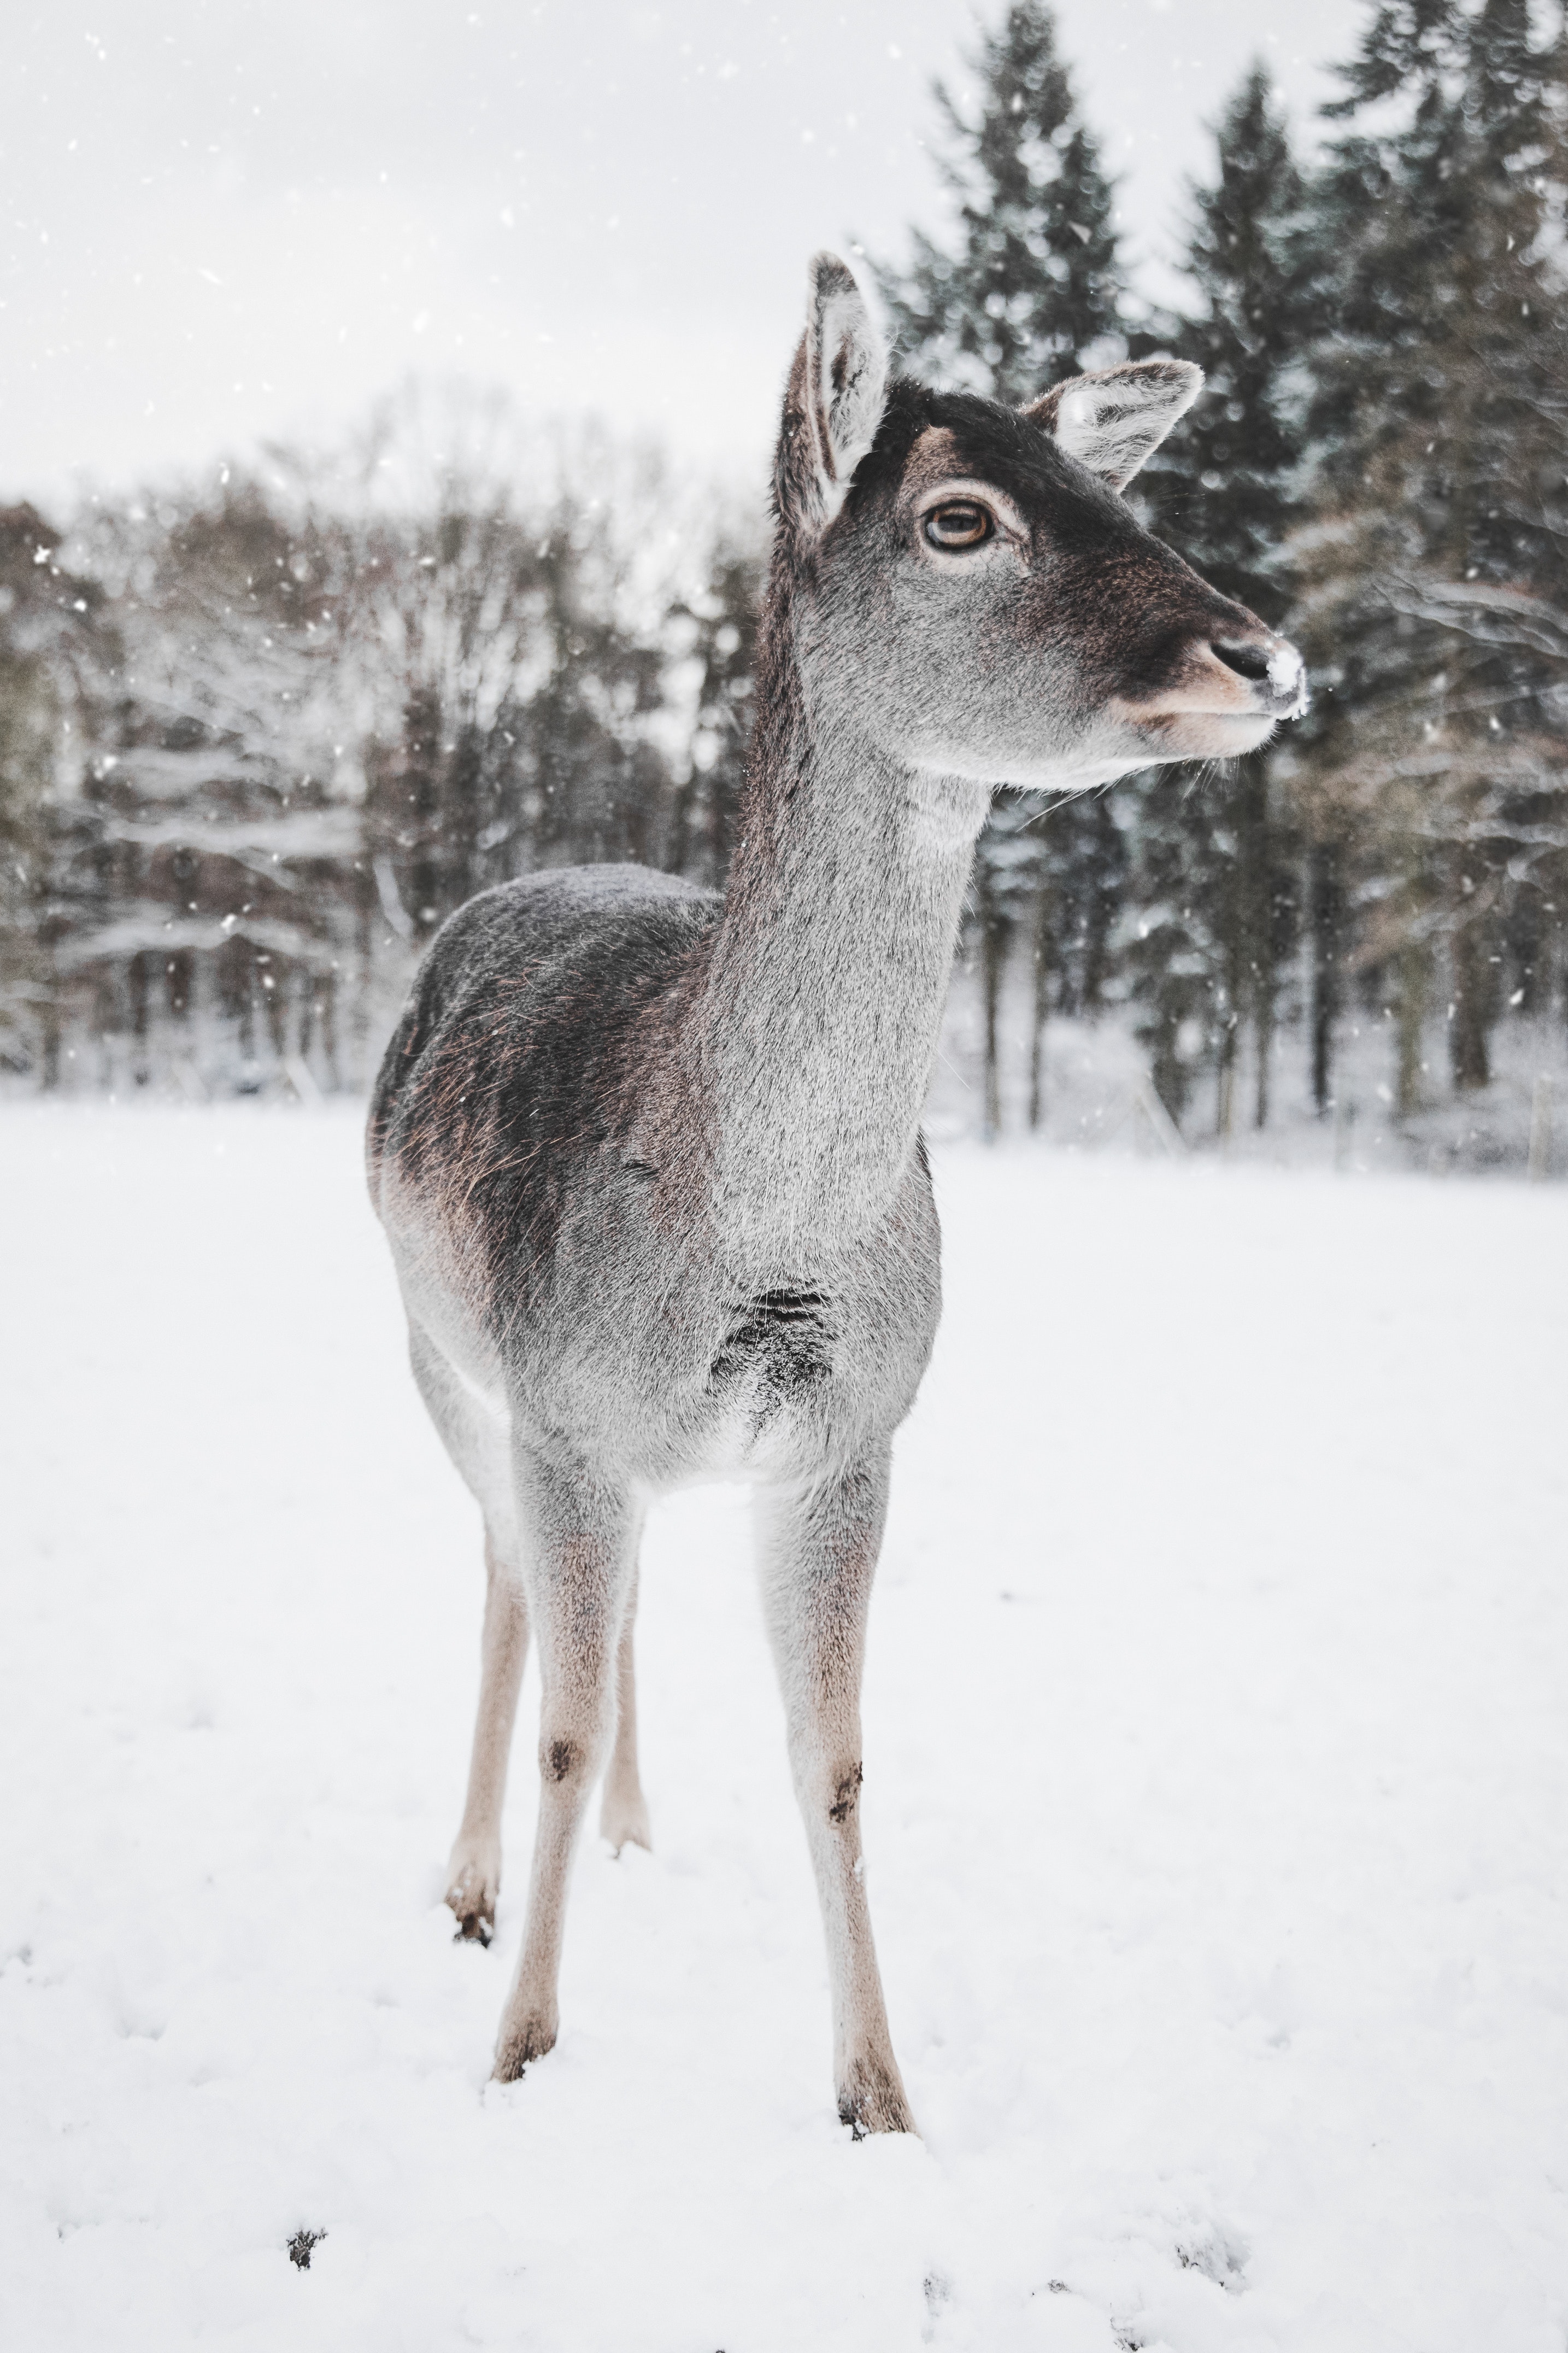 Photo of a baby deer standing at the edge of the winter woods